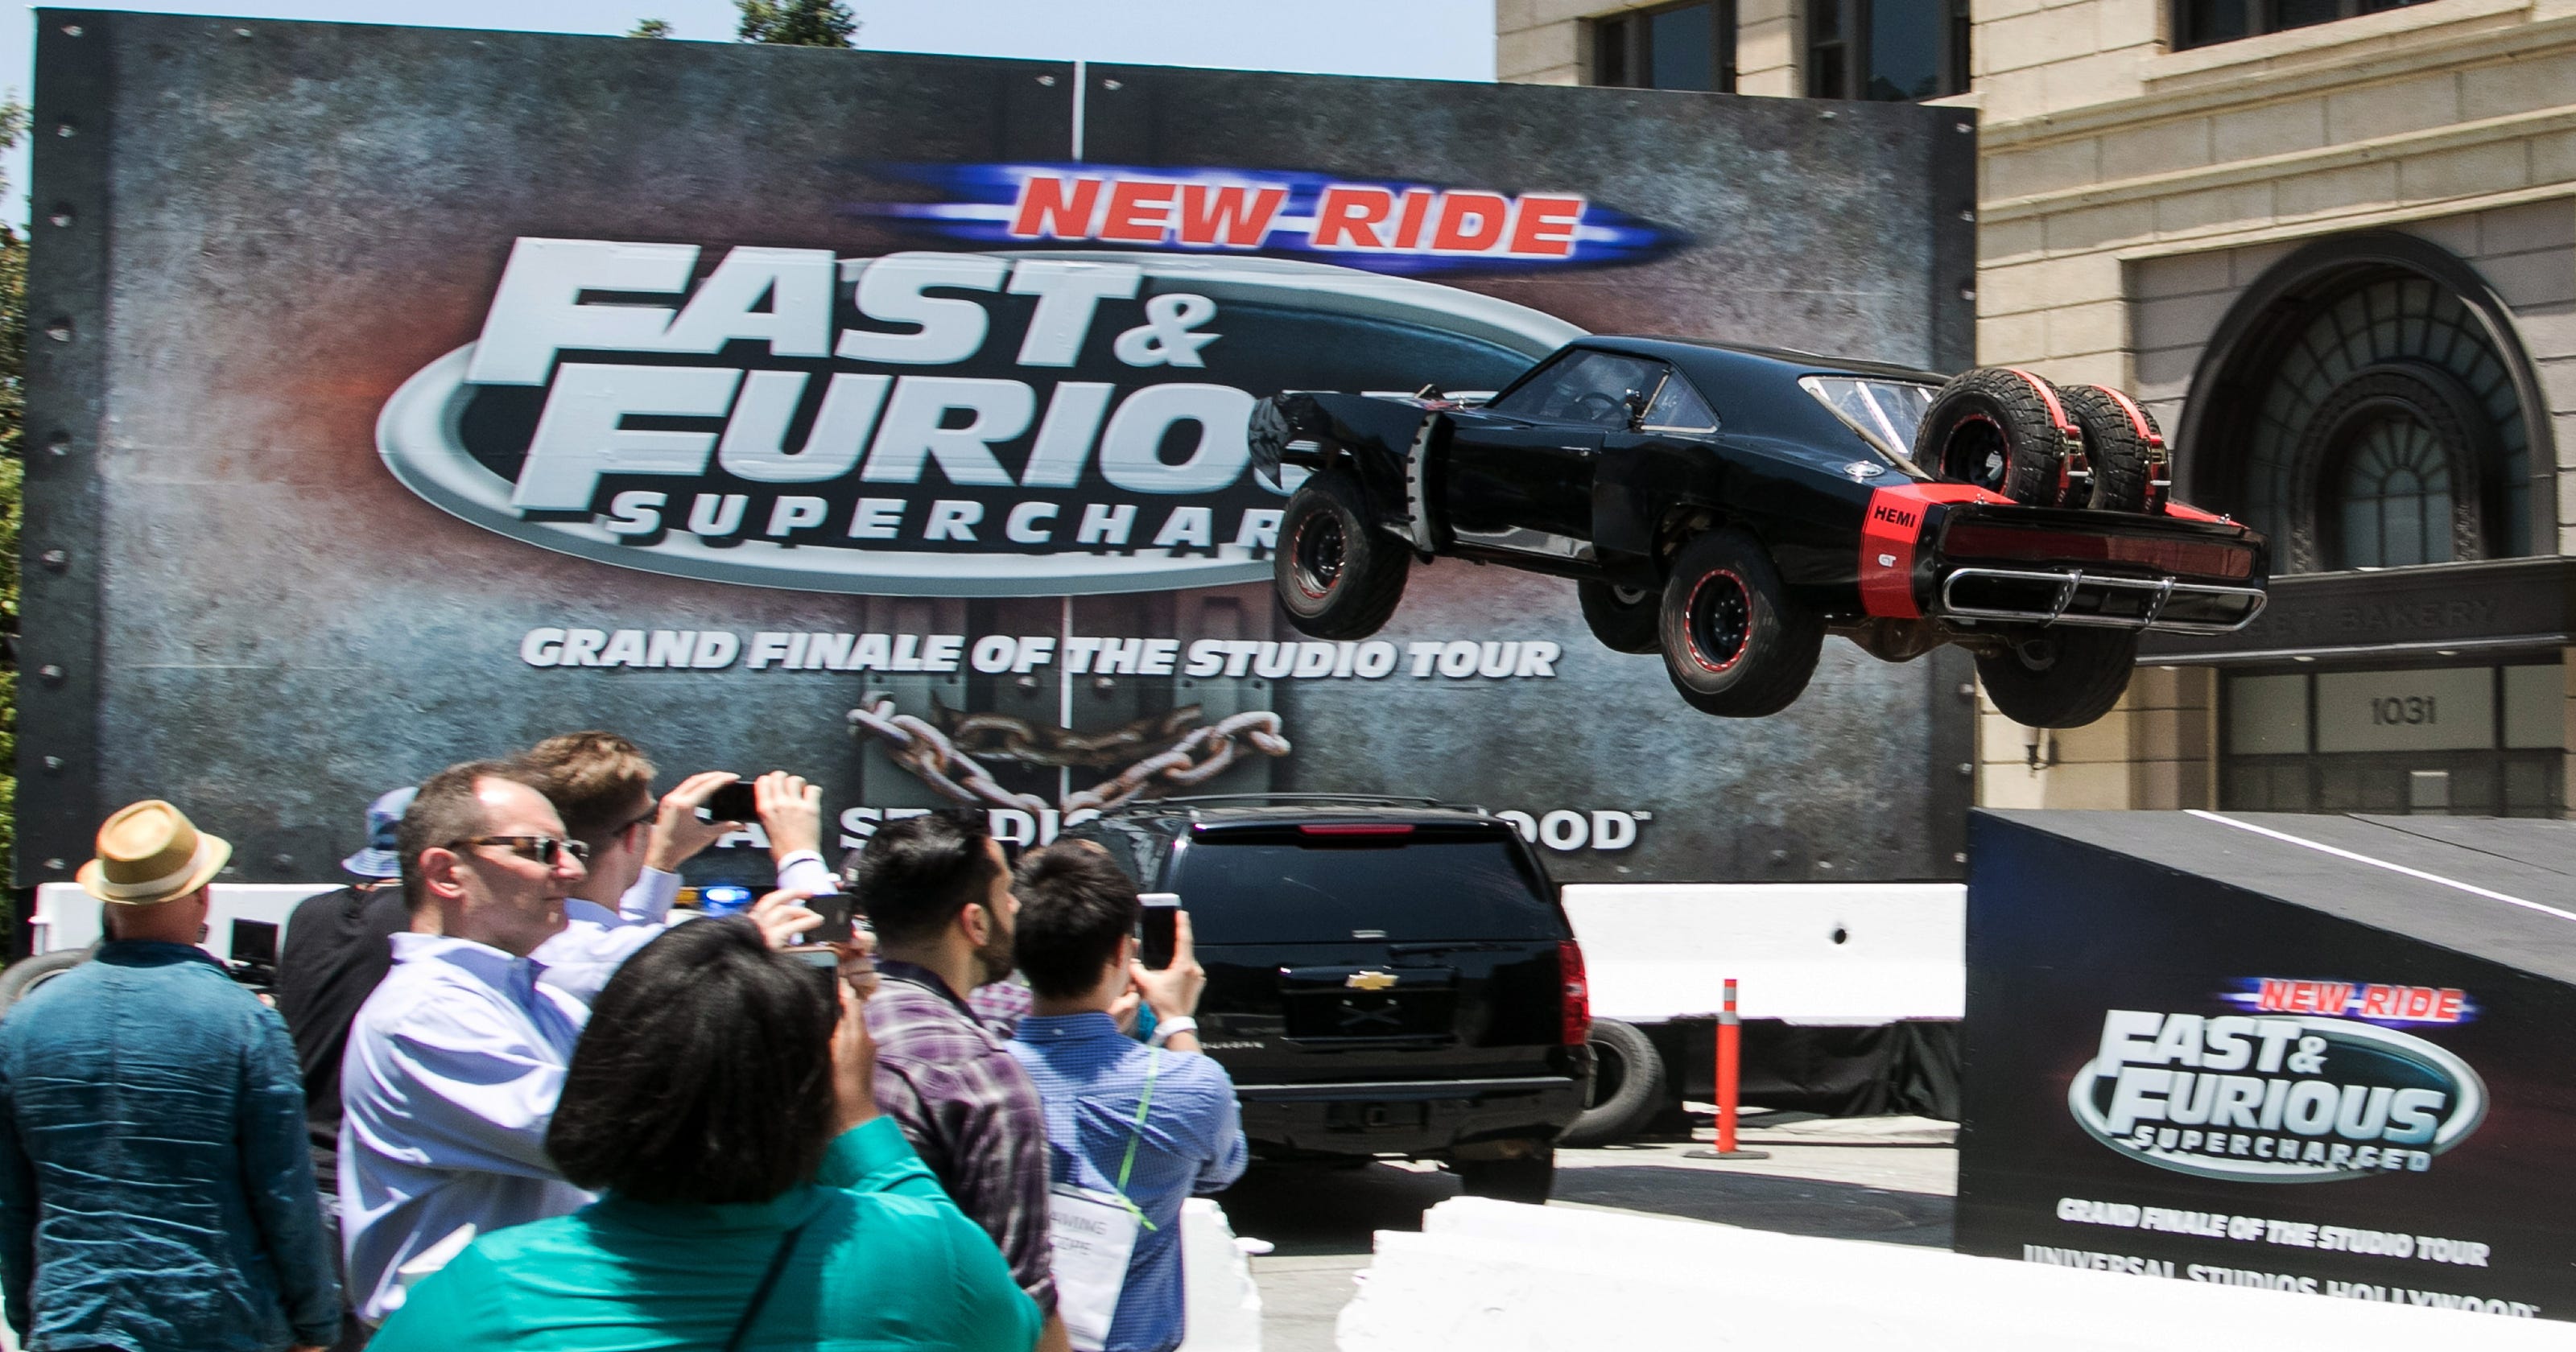 AP WORLD PREMIERE OF FAST FURIOUS SUPERCHARGED JPG